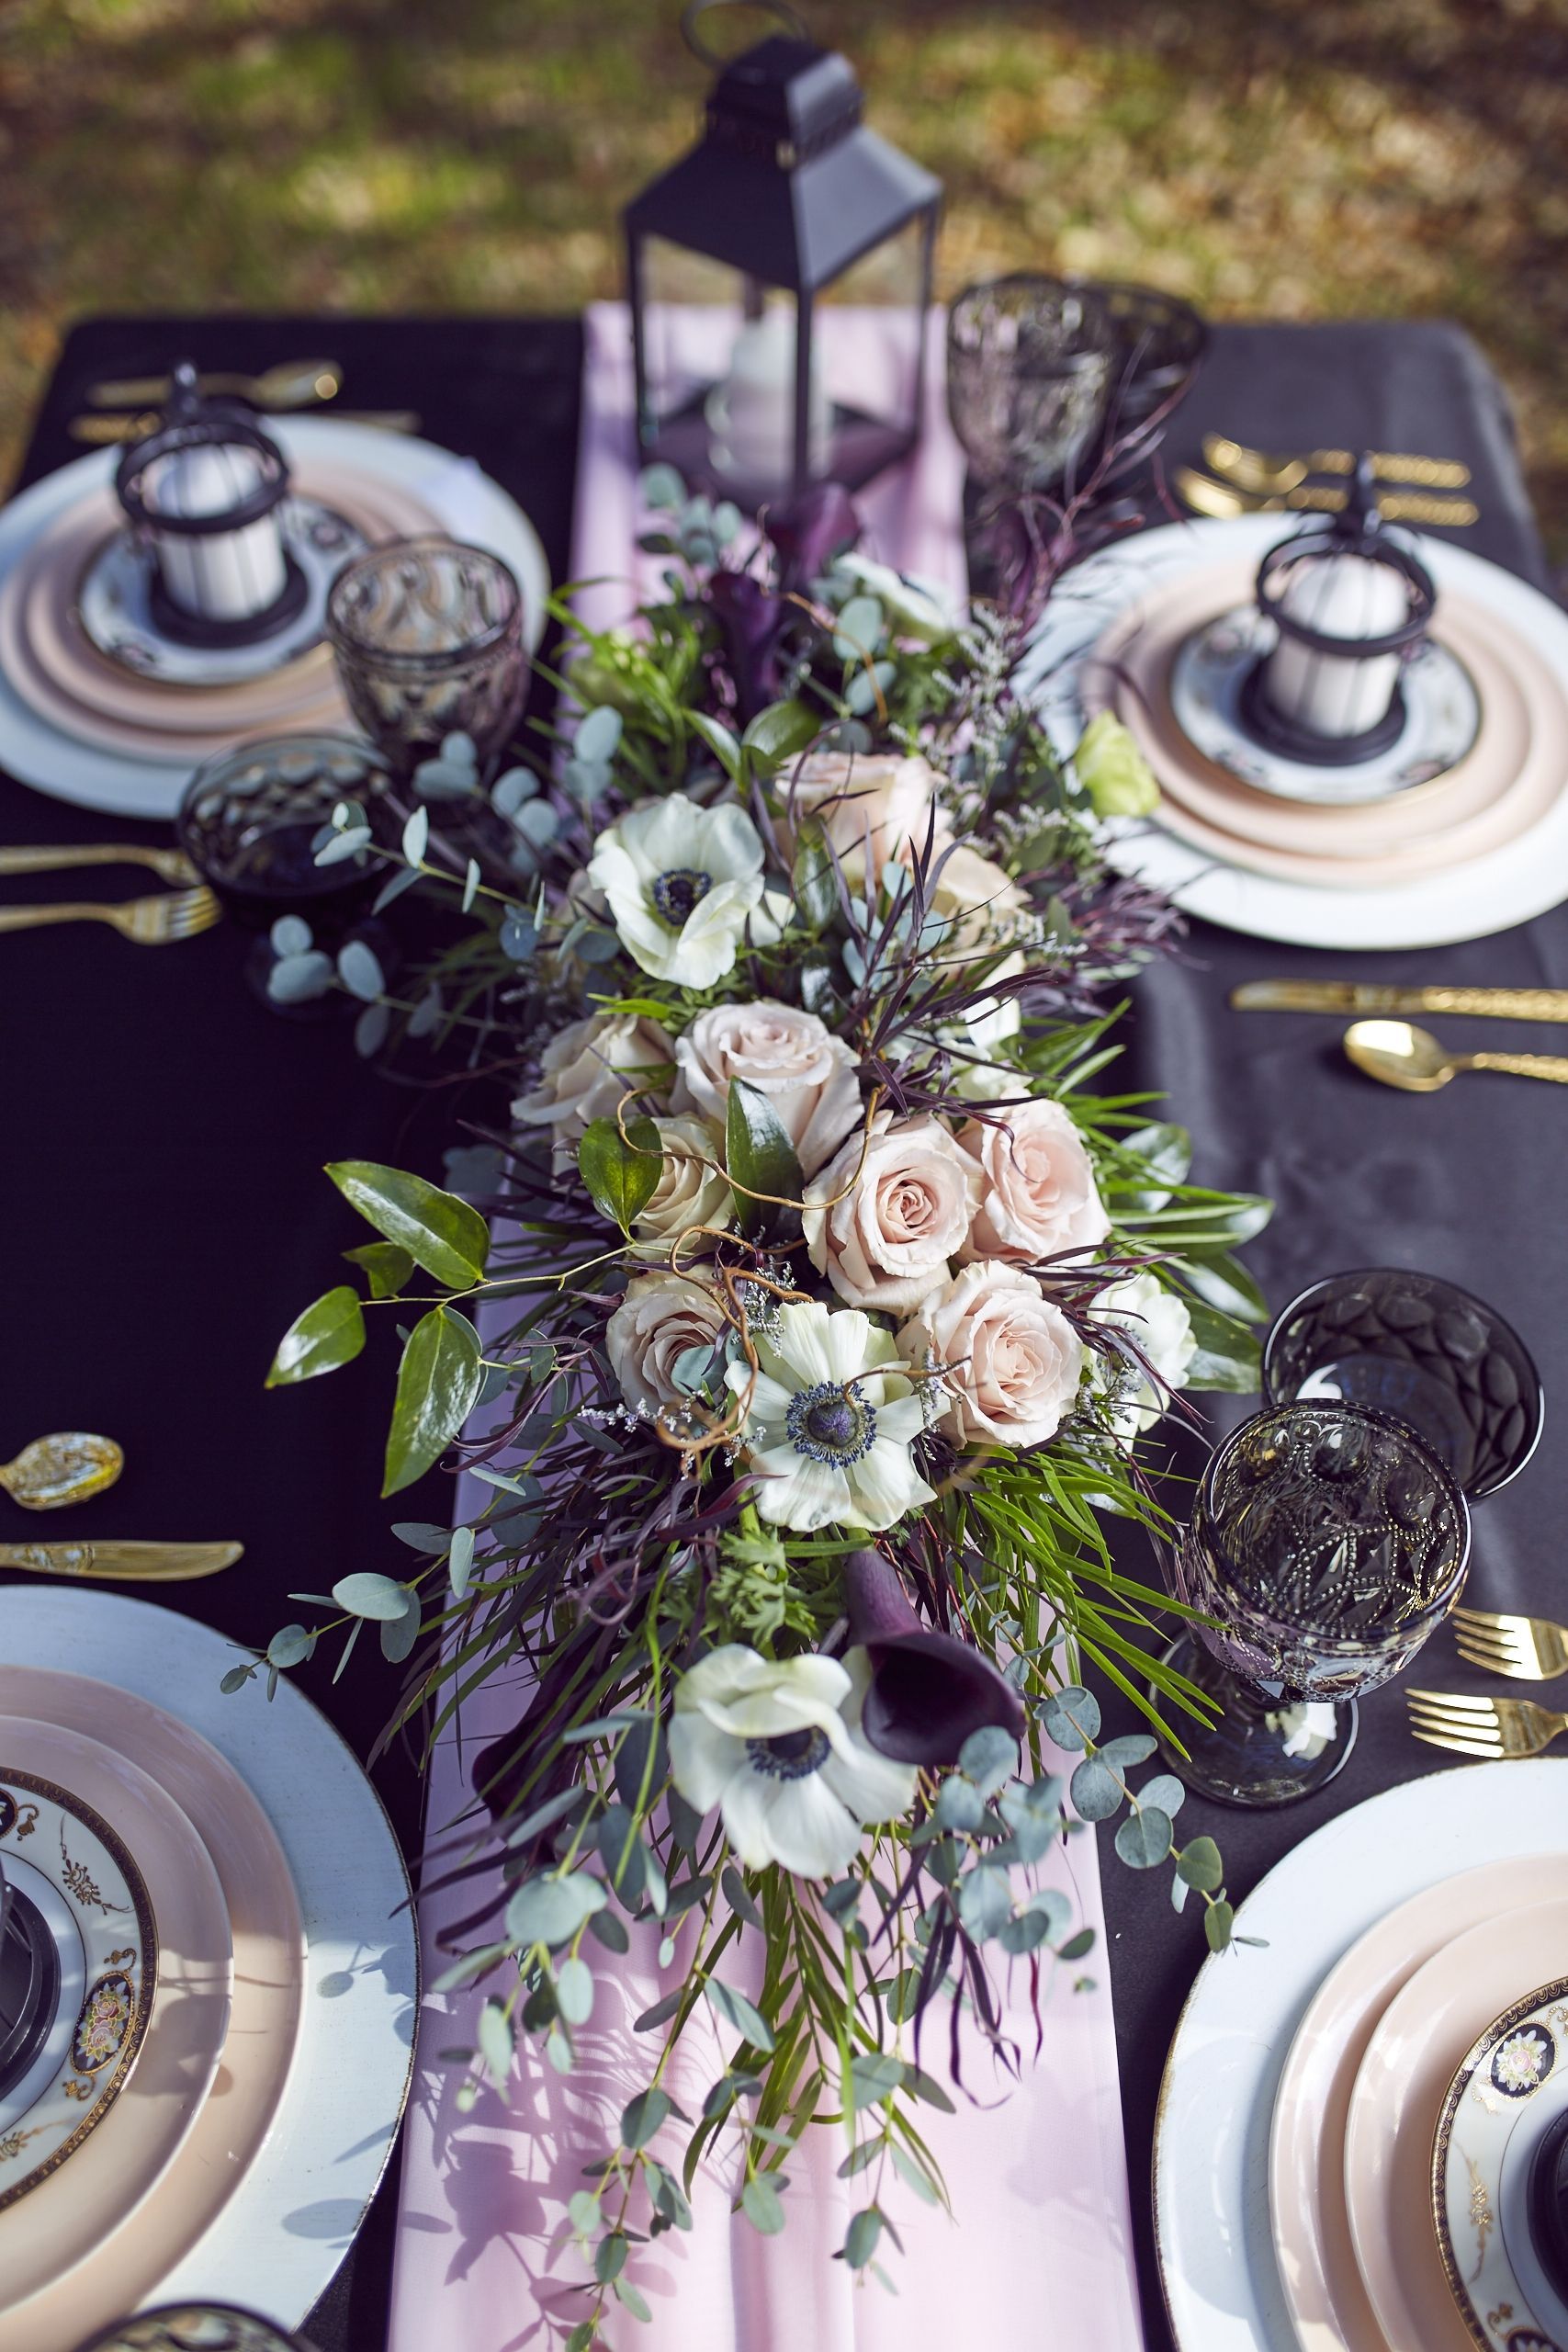 Purple floral arrangement with wedding dinner table setting